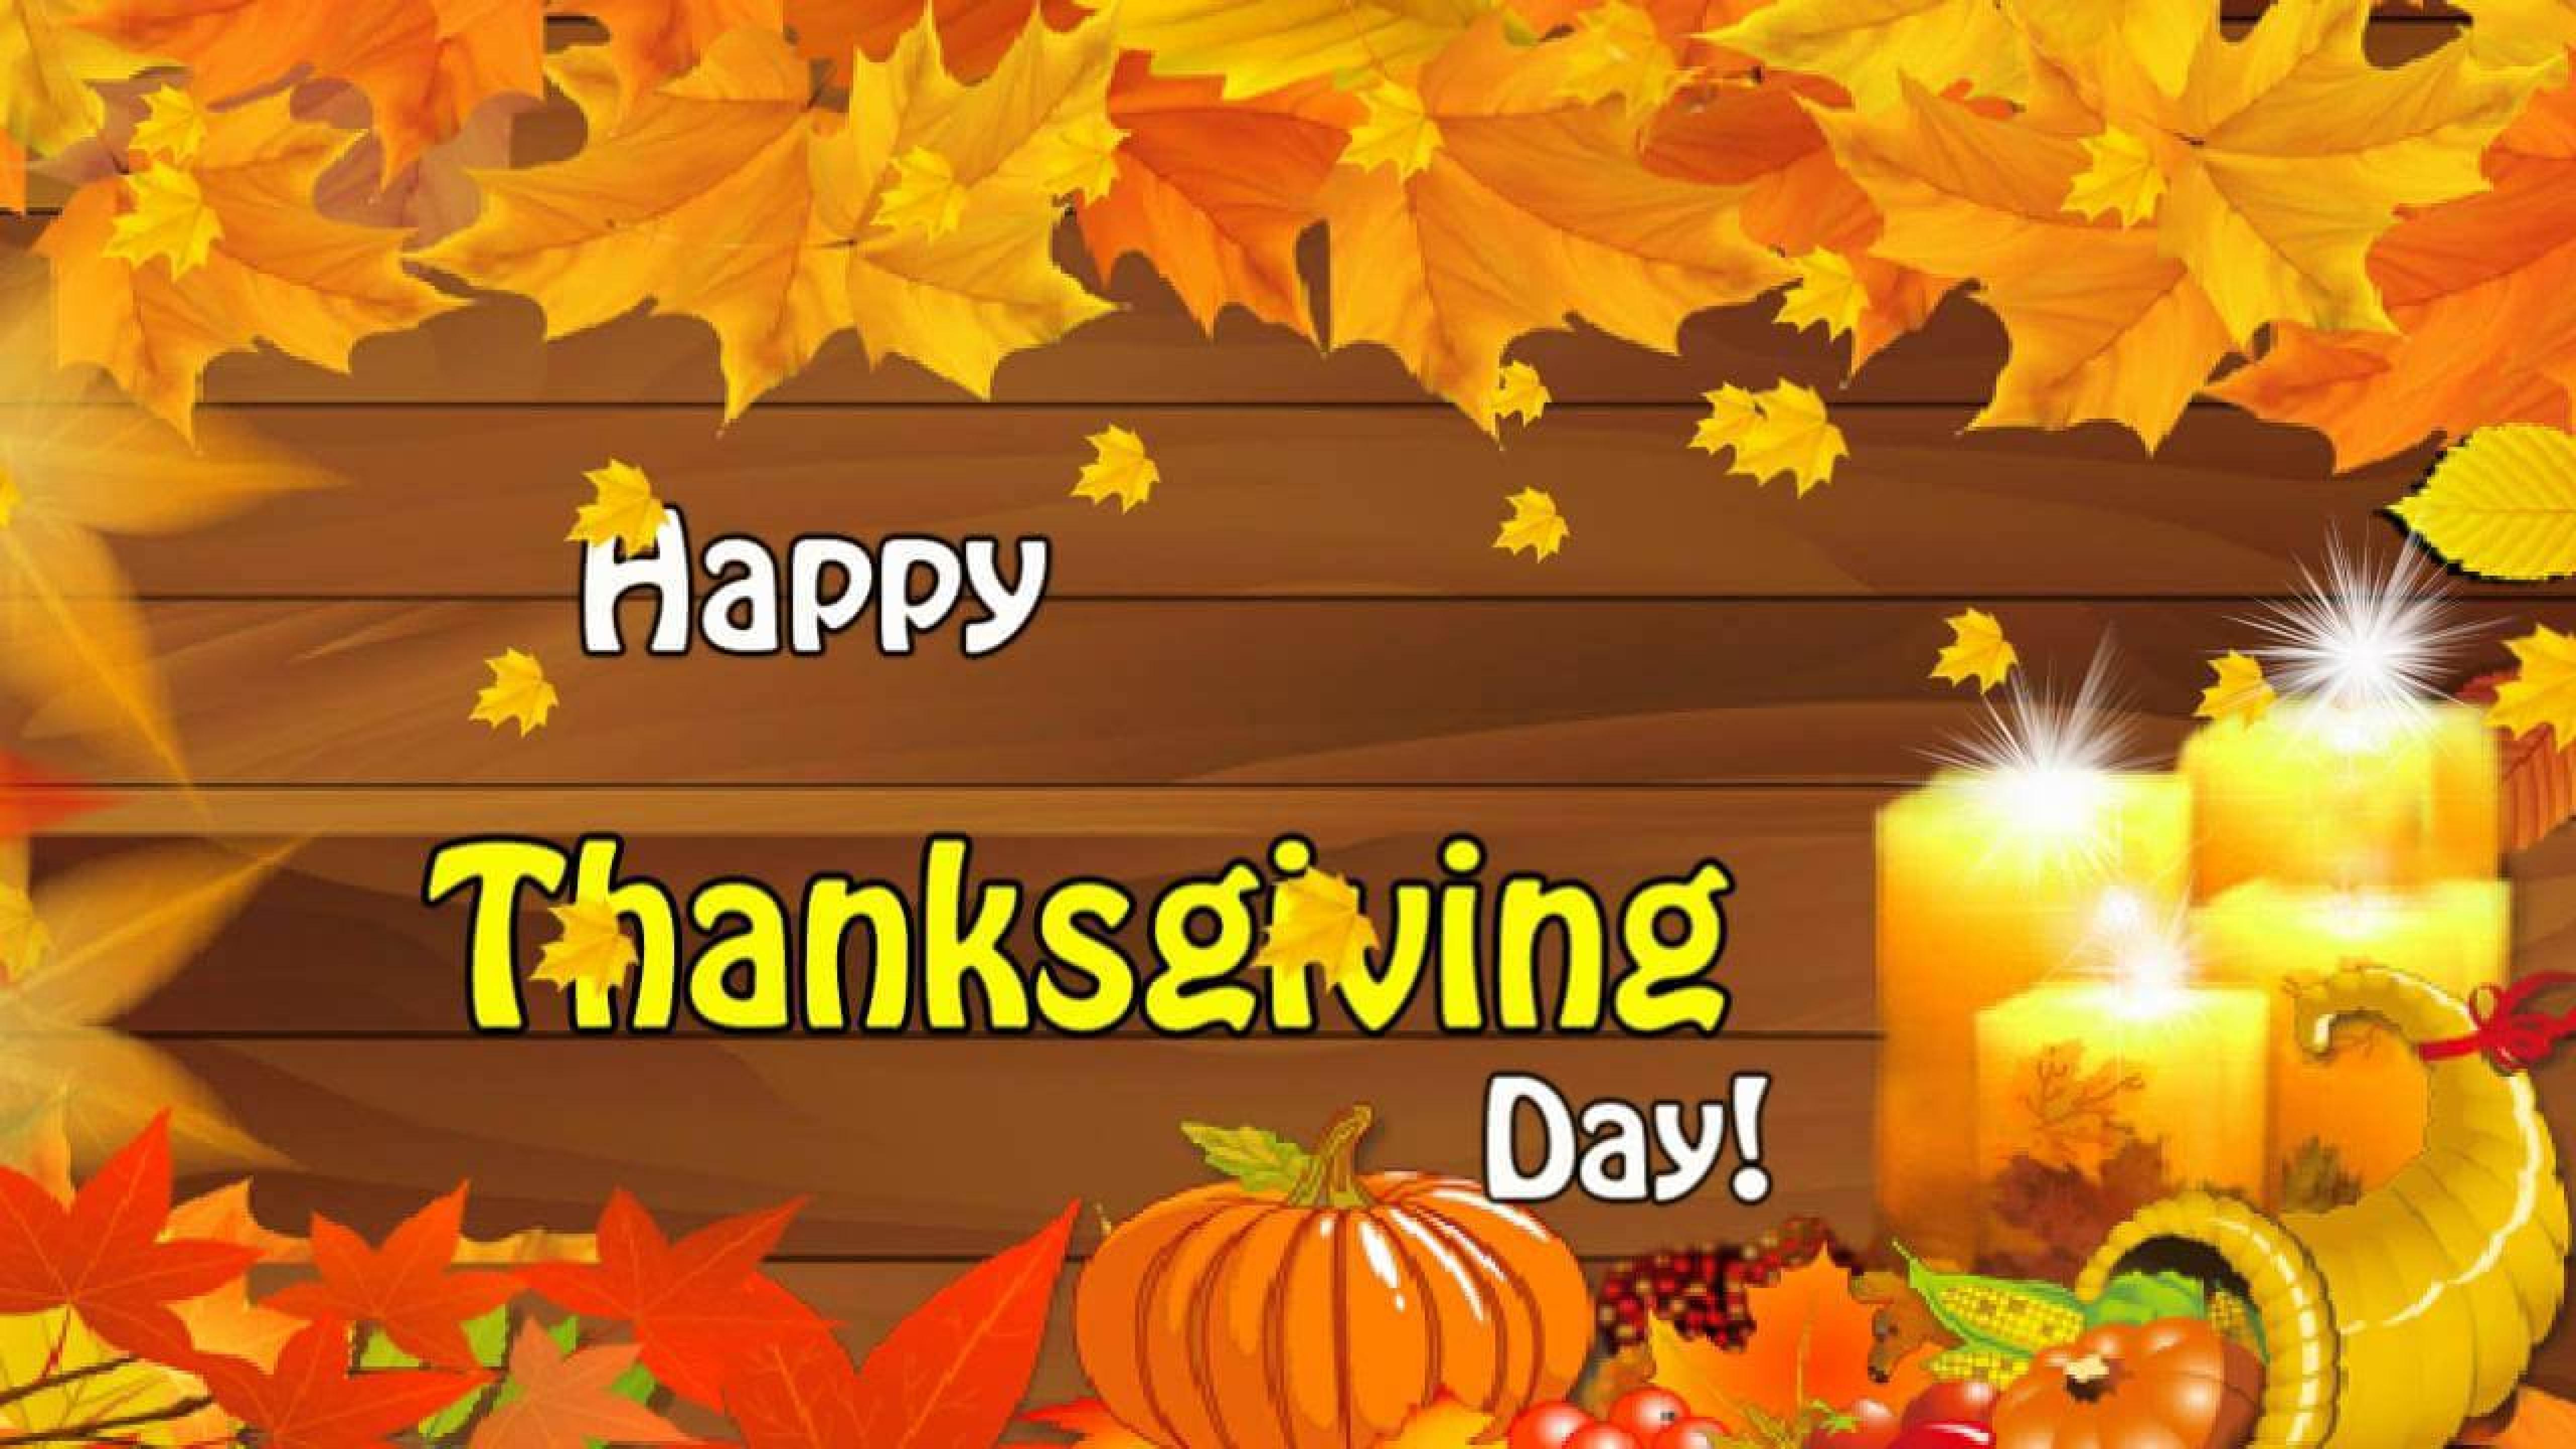 Happy Thanksgiving Day Pumpkin Candles Leaves Background HD